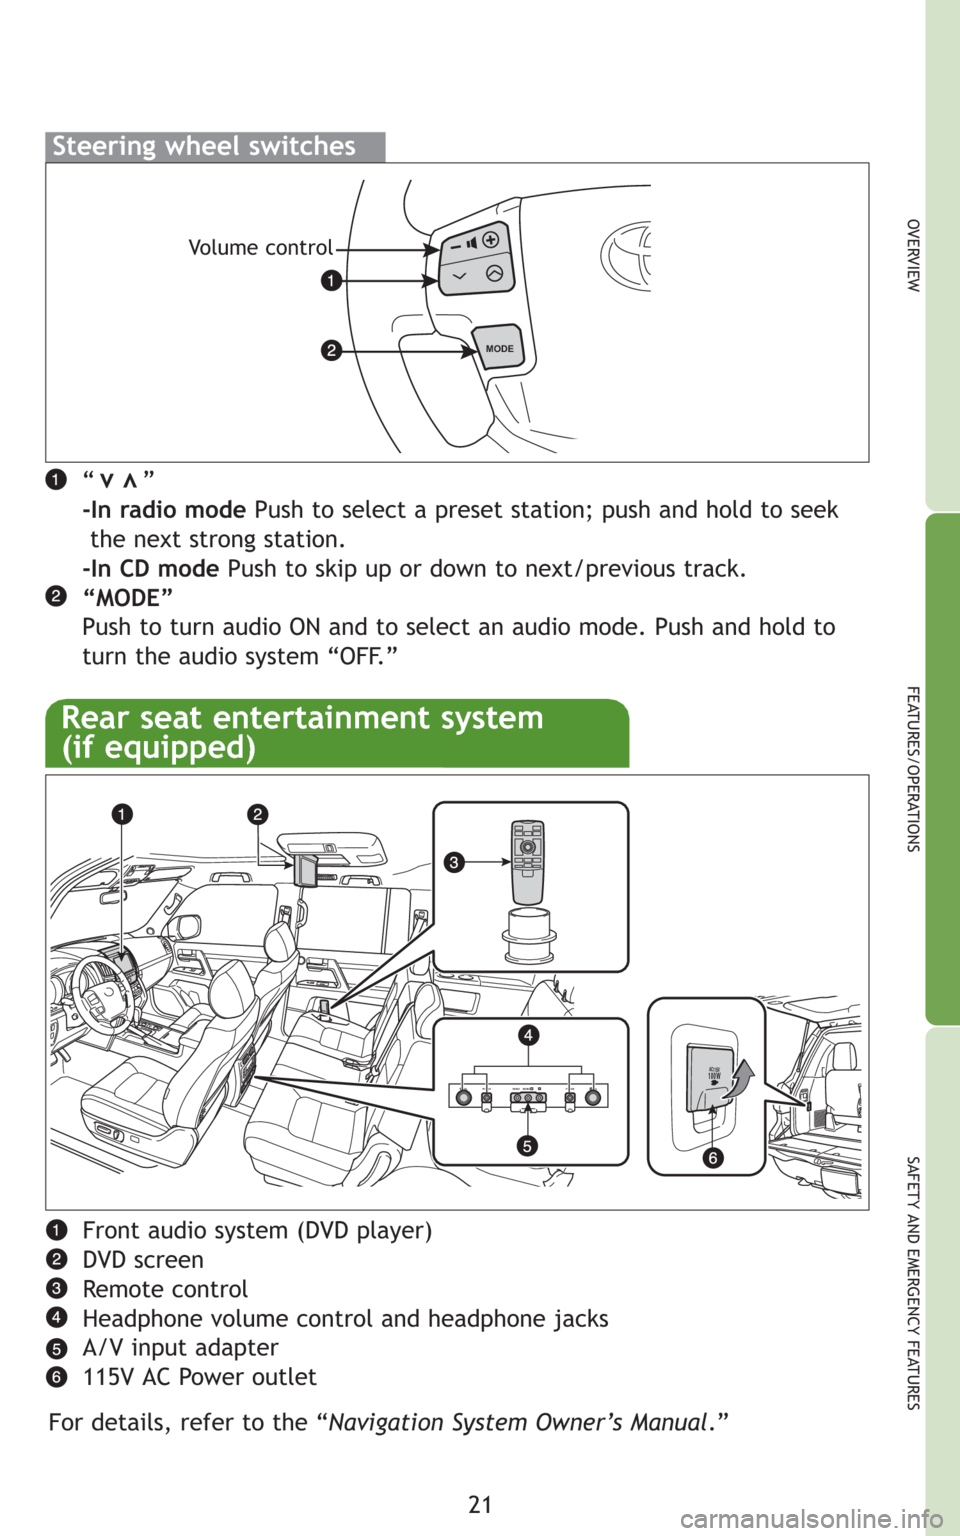 TOYOTA LAND CRUISER 2008 J200 Quick Reference Guide 21
OVERVIEW
FEATURES/OPERATIONS
SAFETY AND EMERGENCY FEATURES
“      ”
-In radio modePush to select a preset station; push and hold to seek
the next strong station.
-In CD modePush to skip up or d